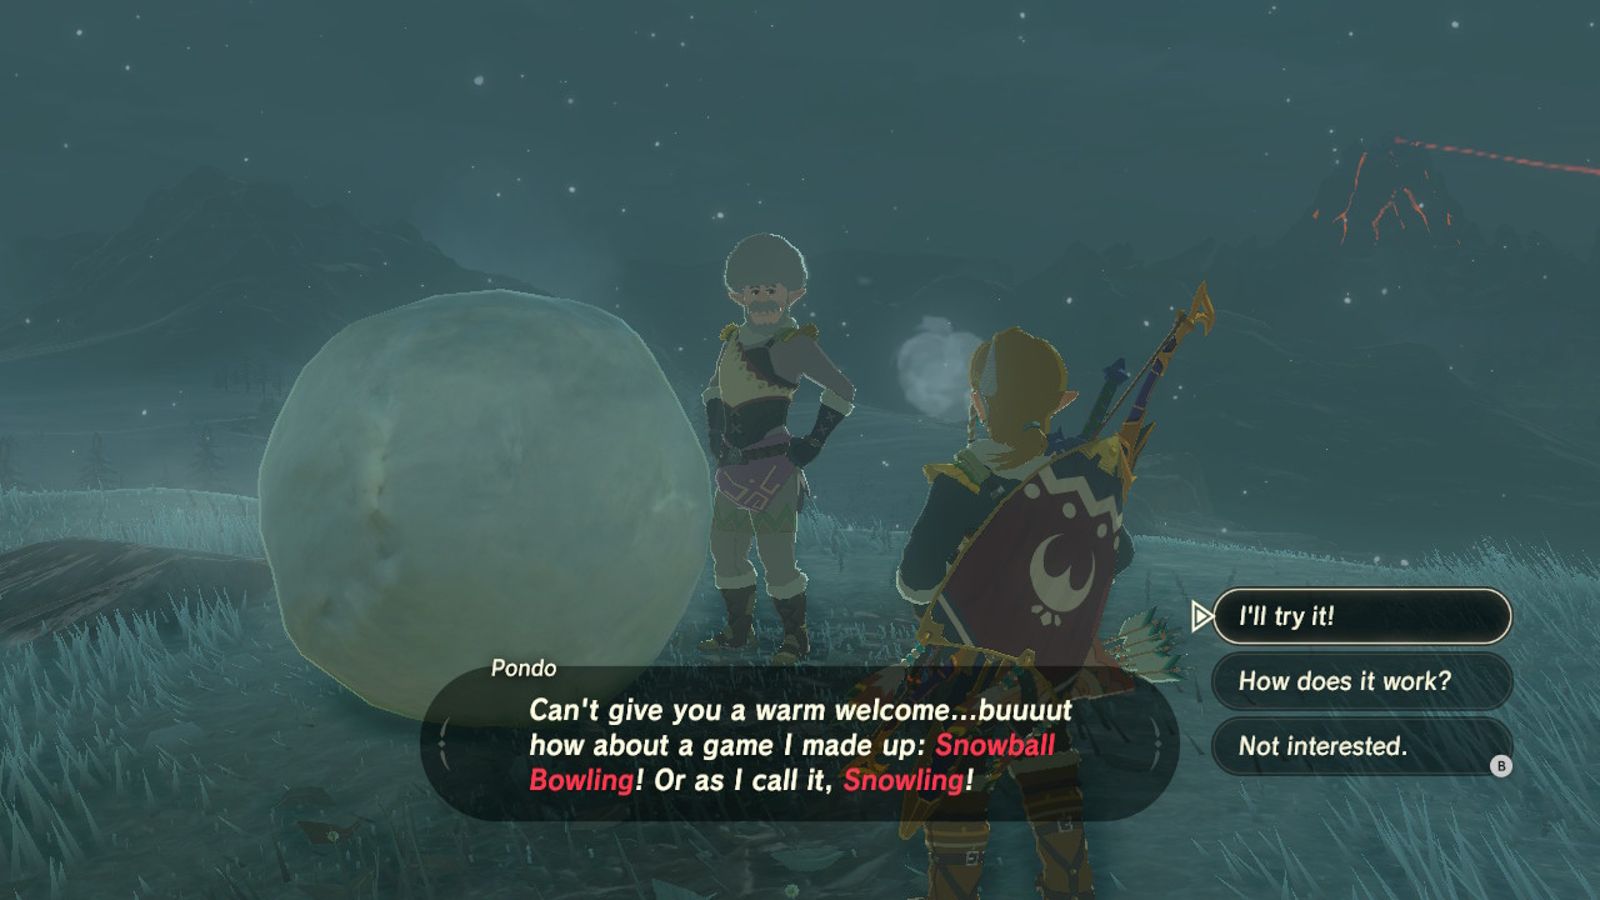 Link can play the Snowling minigame at Pondo's Lodge in BOTW for a Gold Rupee.